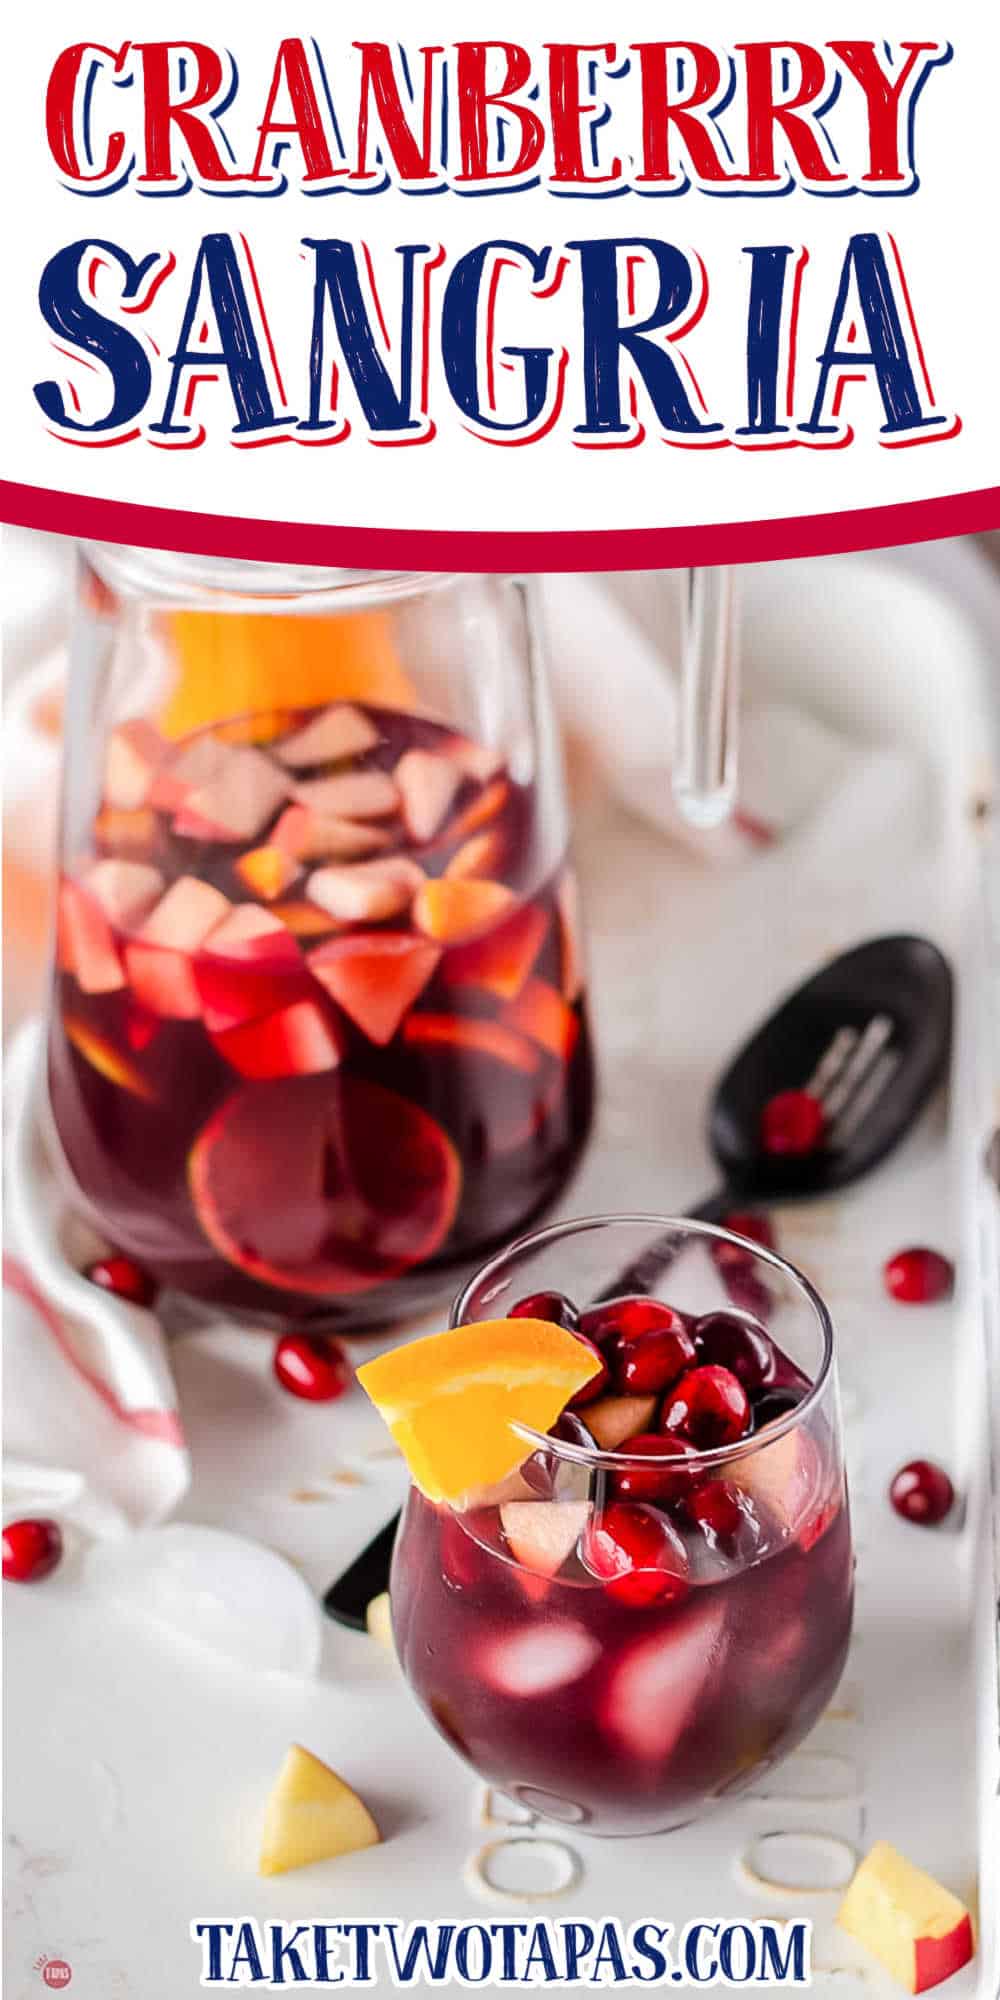 overhead pic of sangria with text "cranberry sangria recipe"